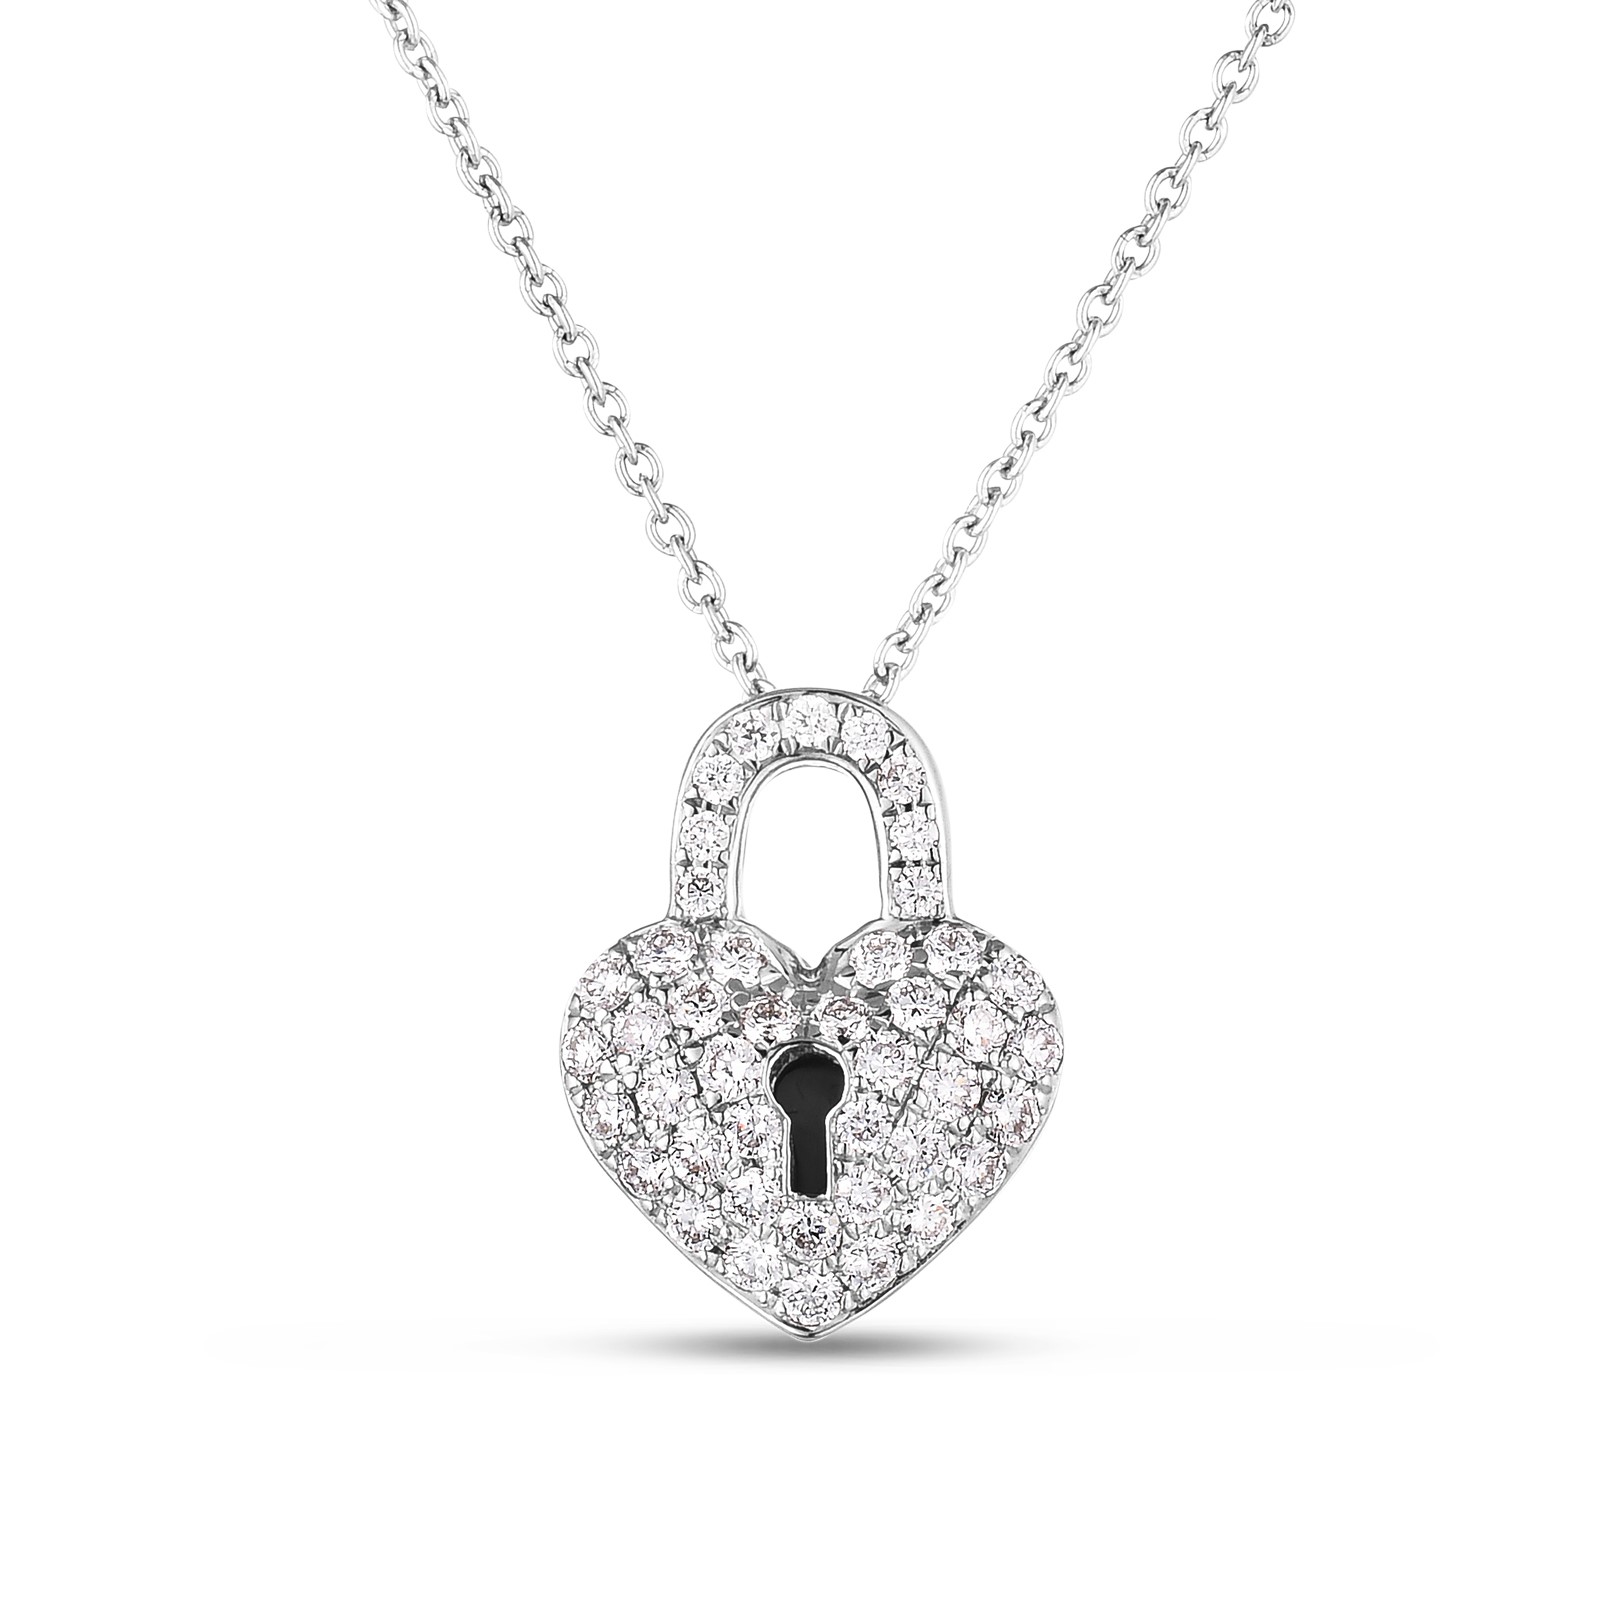 Roberto Coin 18K White Gold Heart Lock Necklace with Round Diamonds 0.25 Tcw G-H SI